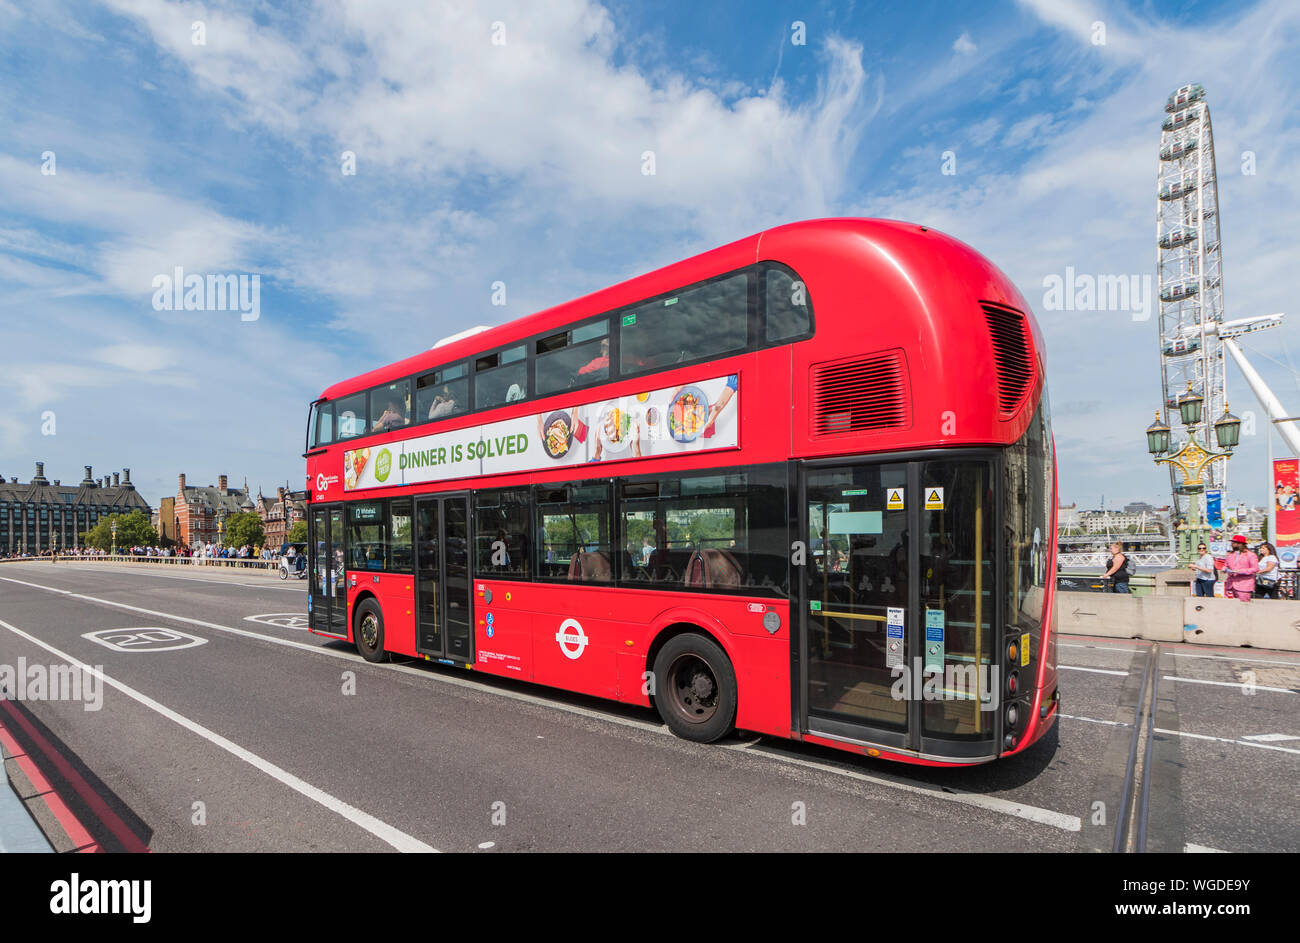 Wrightbus New Routemaster bus, originally New Bus for London, a hybrid double deck red London bus in City of Westminster, London, UK. Bus London. Stock Photo